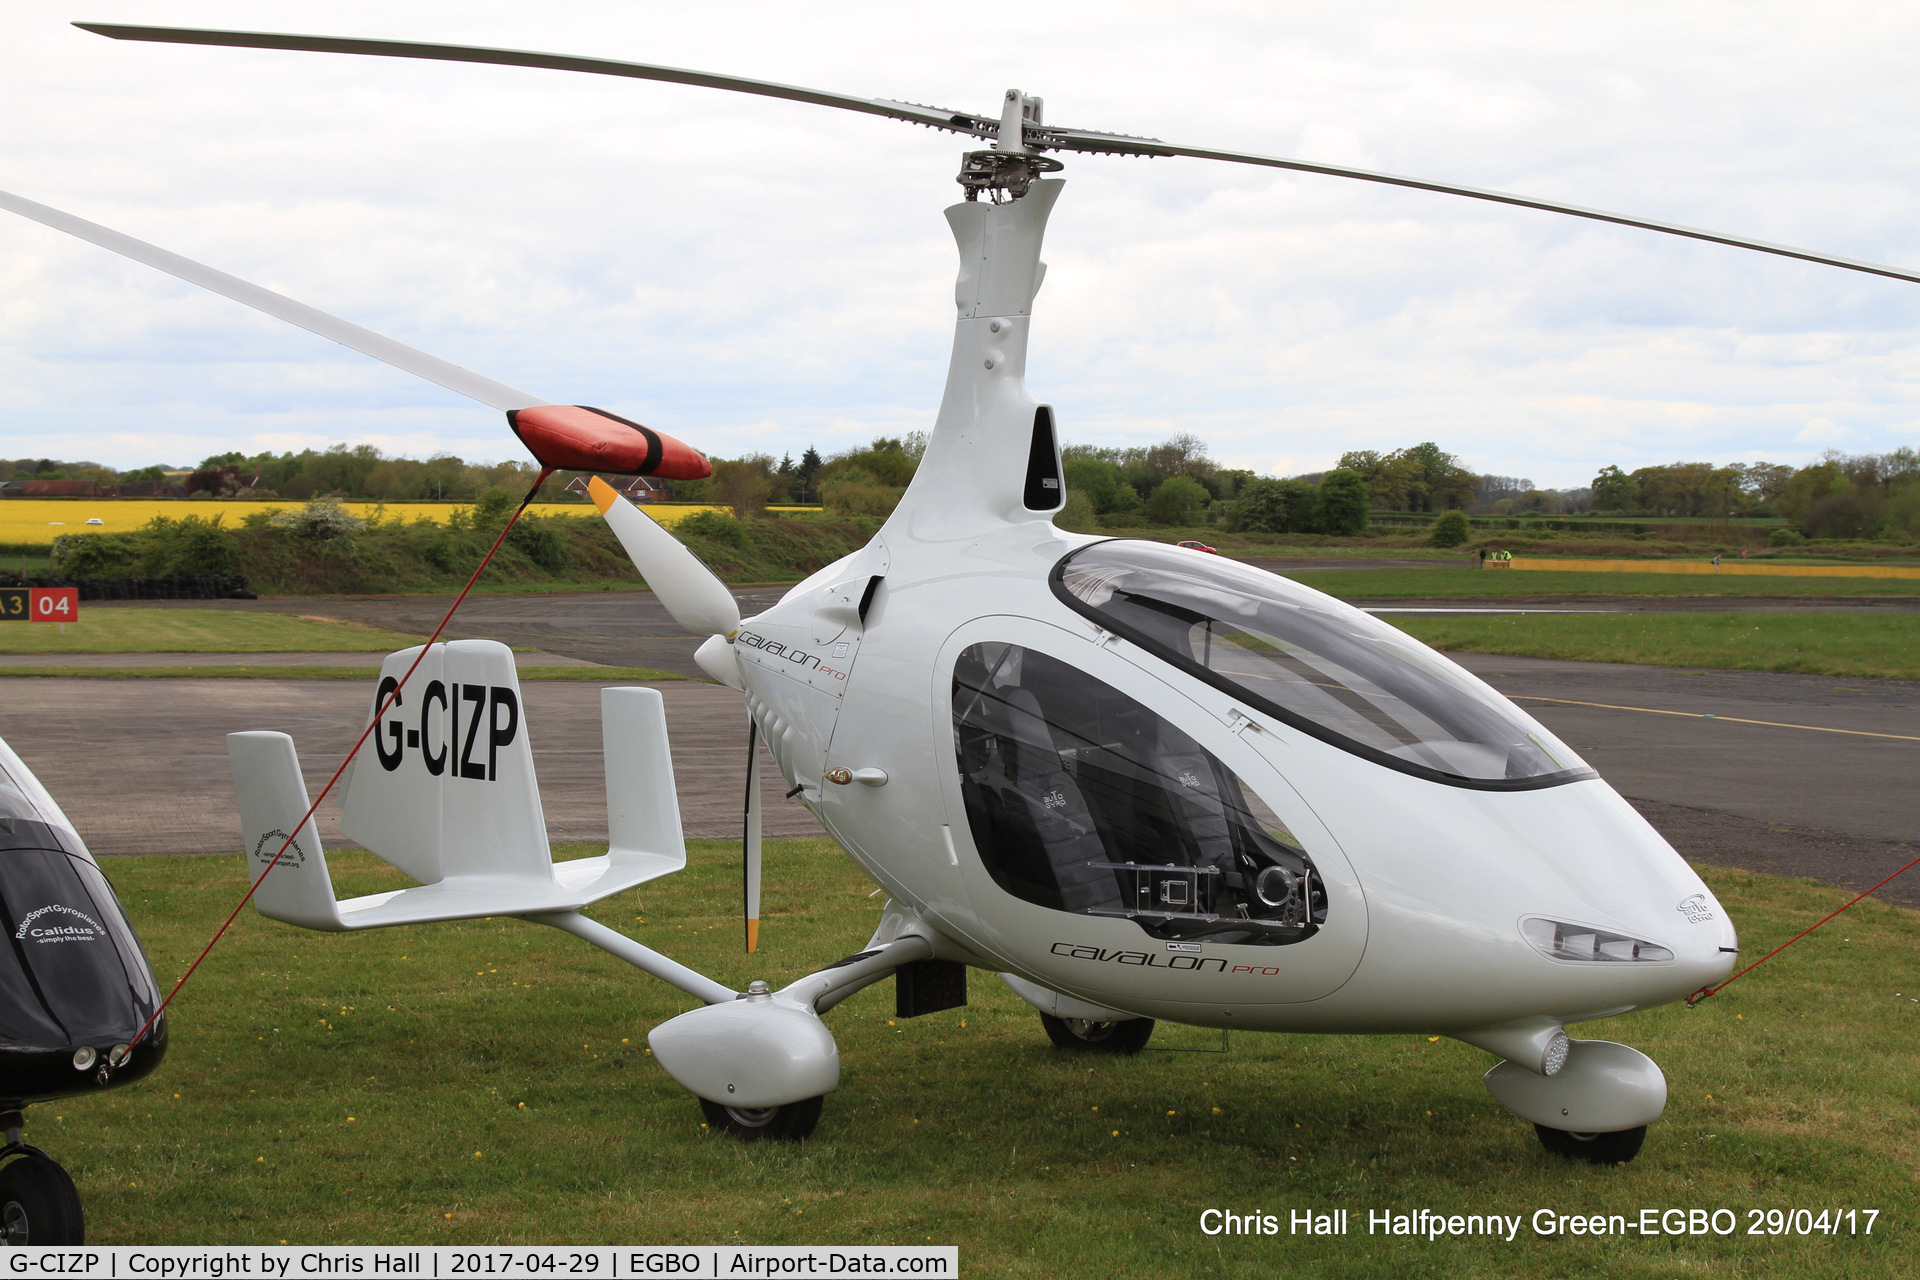 G-CIZP, 2015 RotorSport UK Cavalon Pro C/N RSUK/CAVP/001, at the Radial & Trainer fly-in